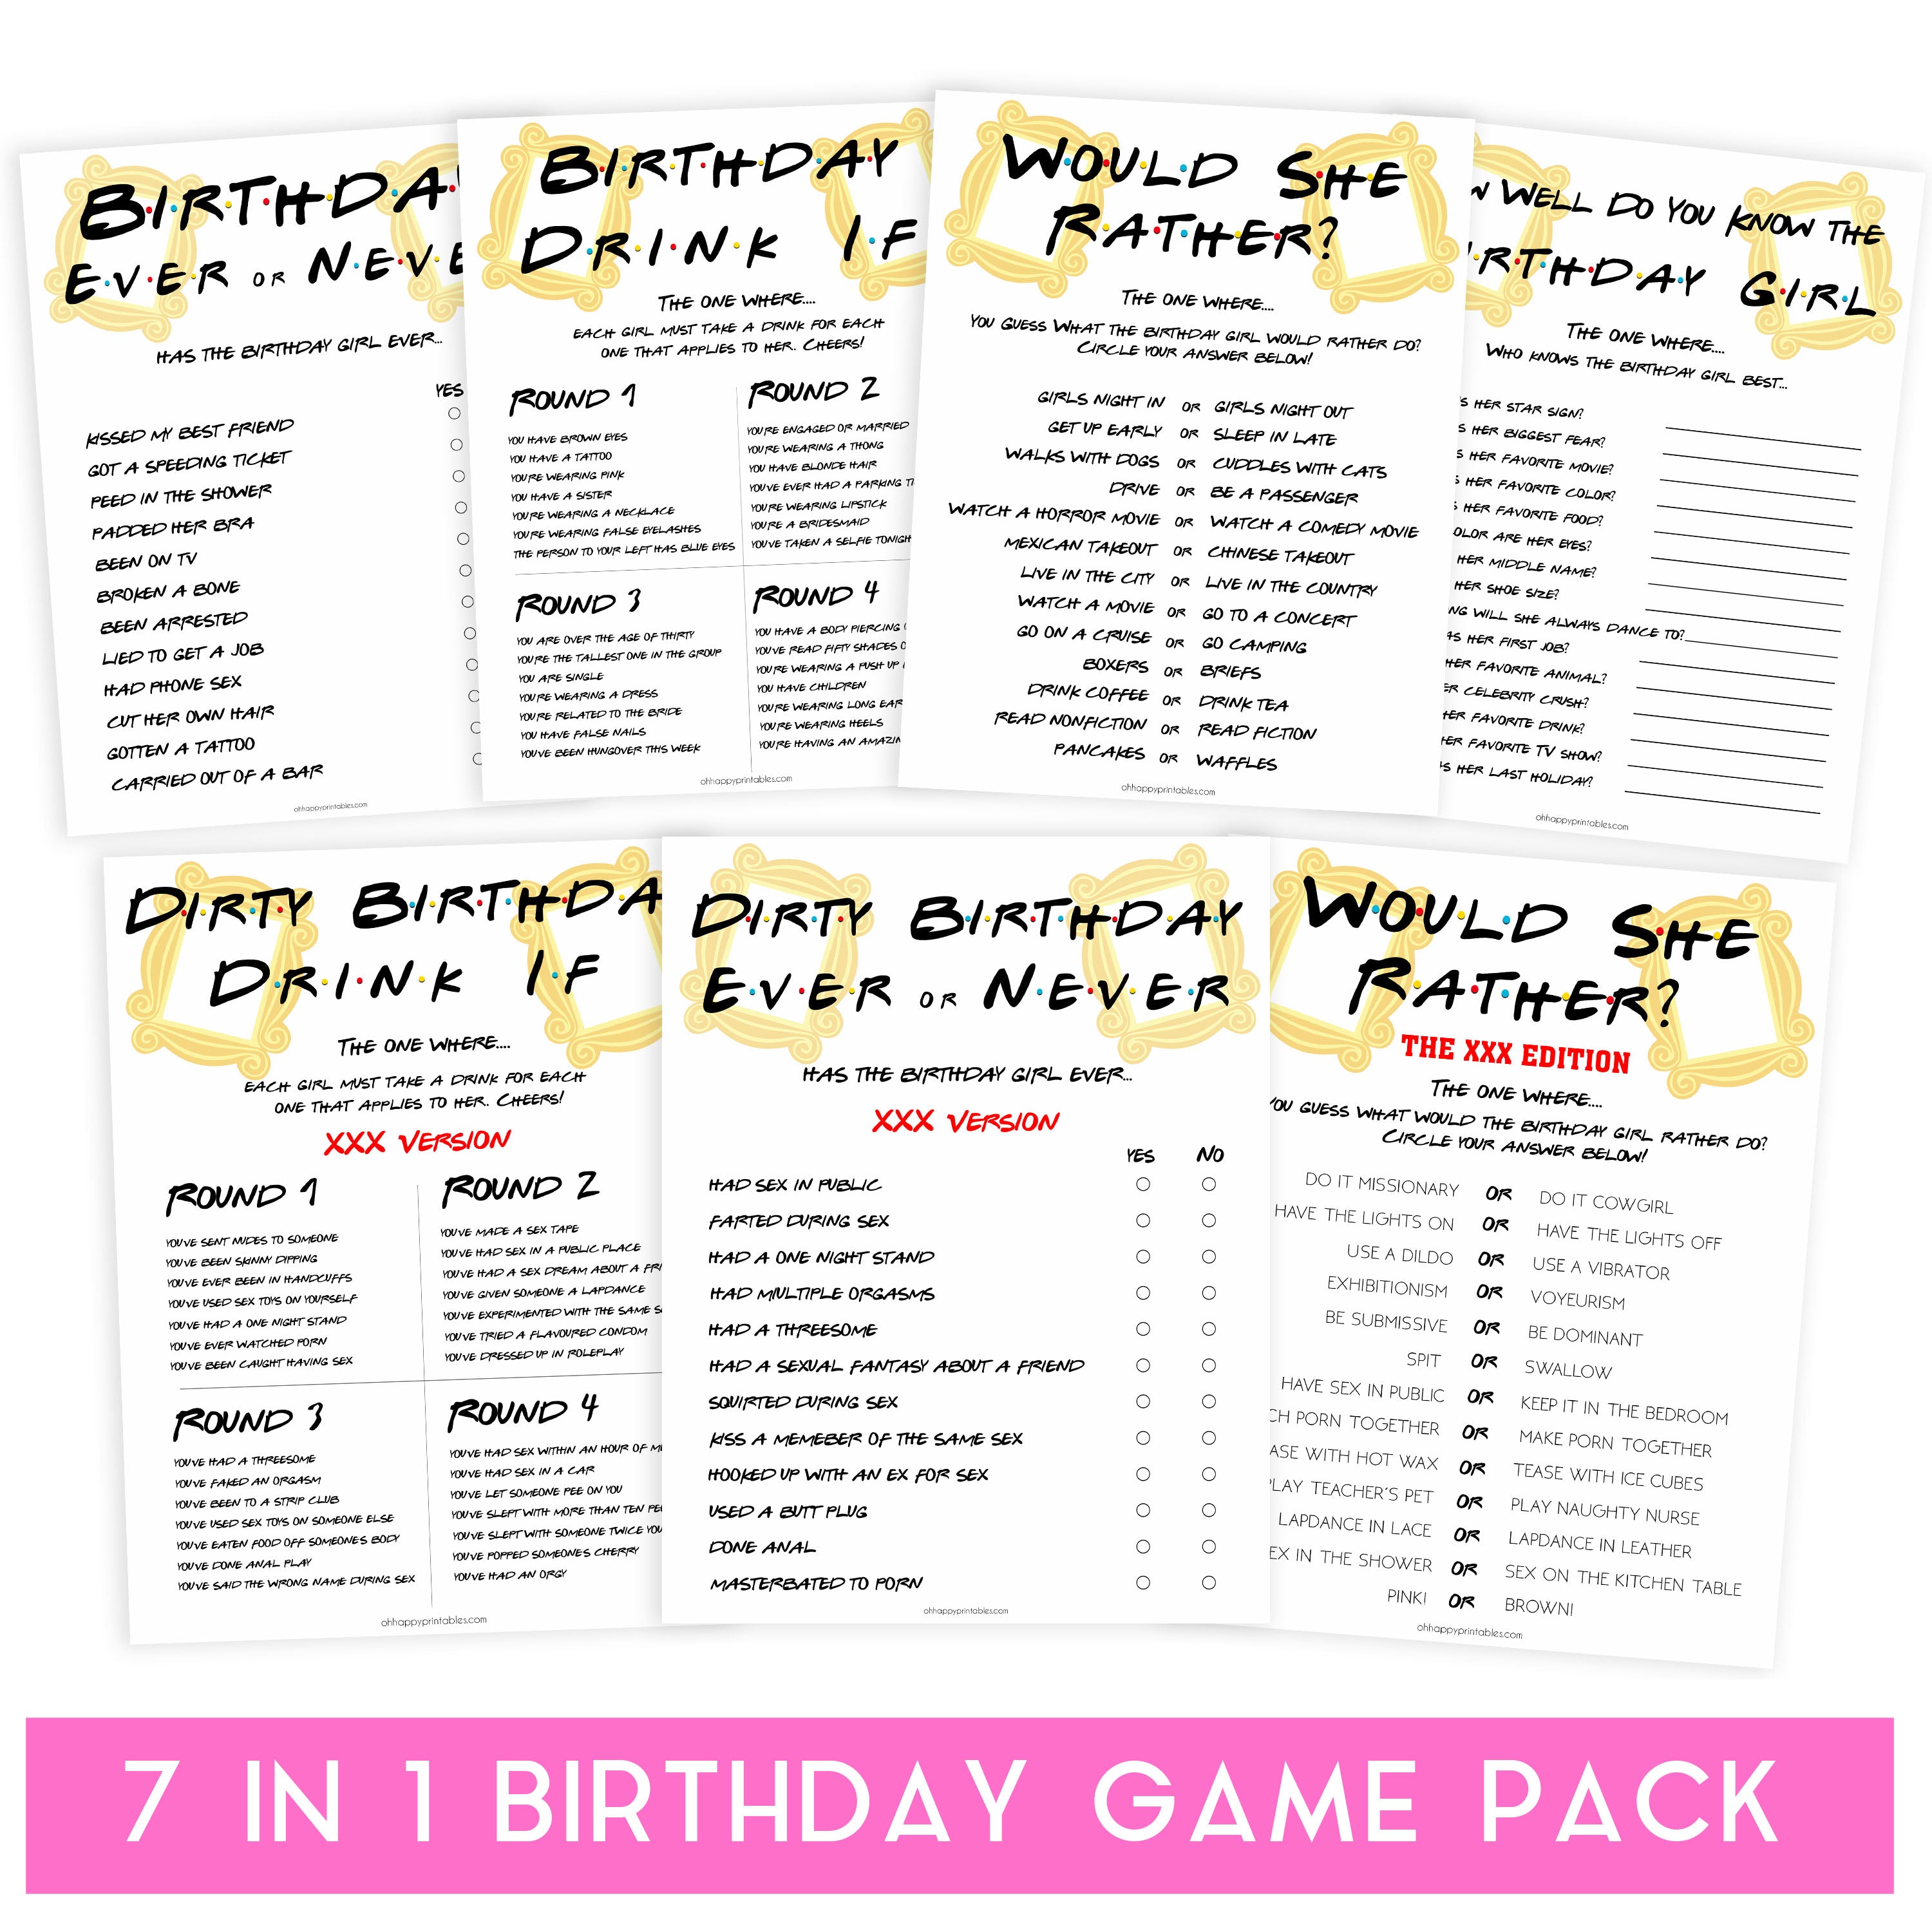 7 birthday games, would she rather birthday games, friends birthday games, fun birthday games, birthday drink if game